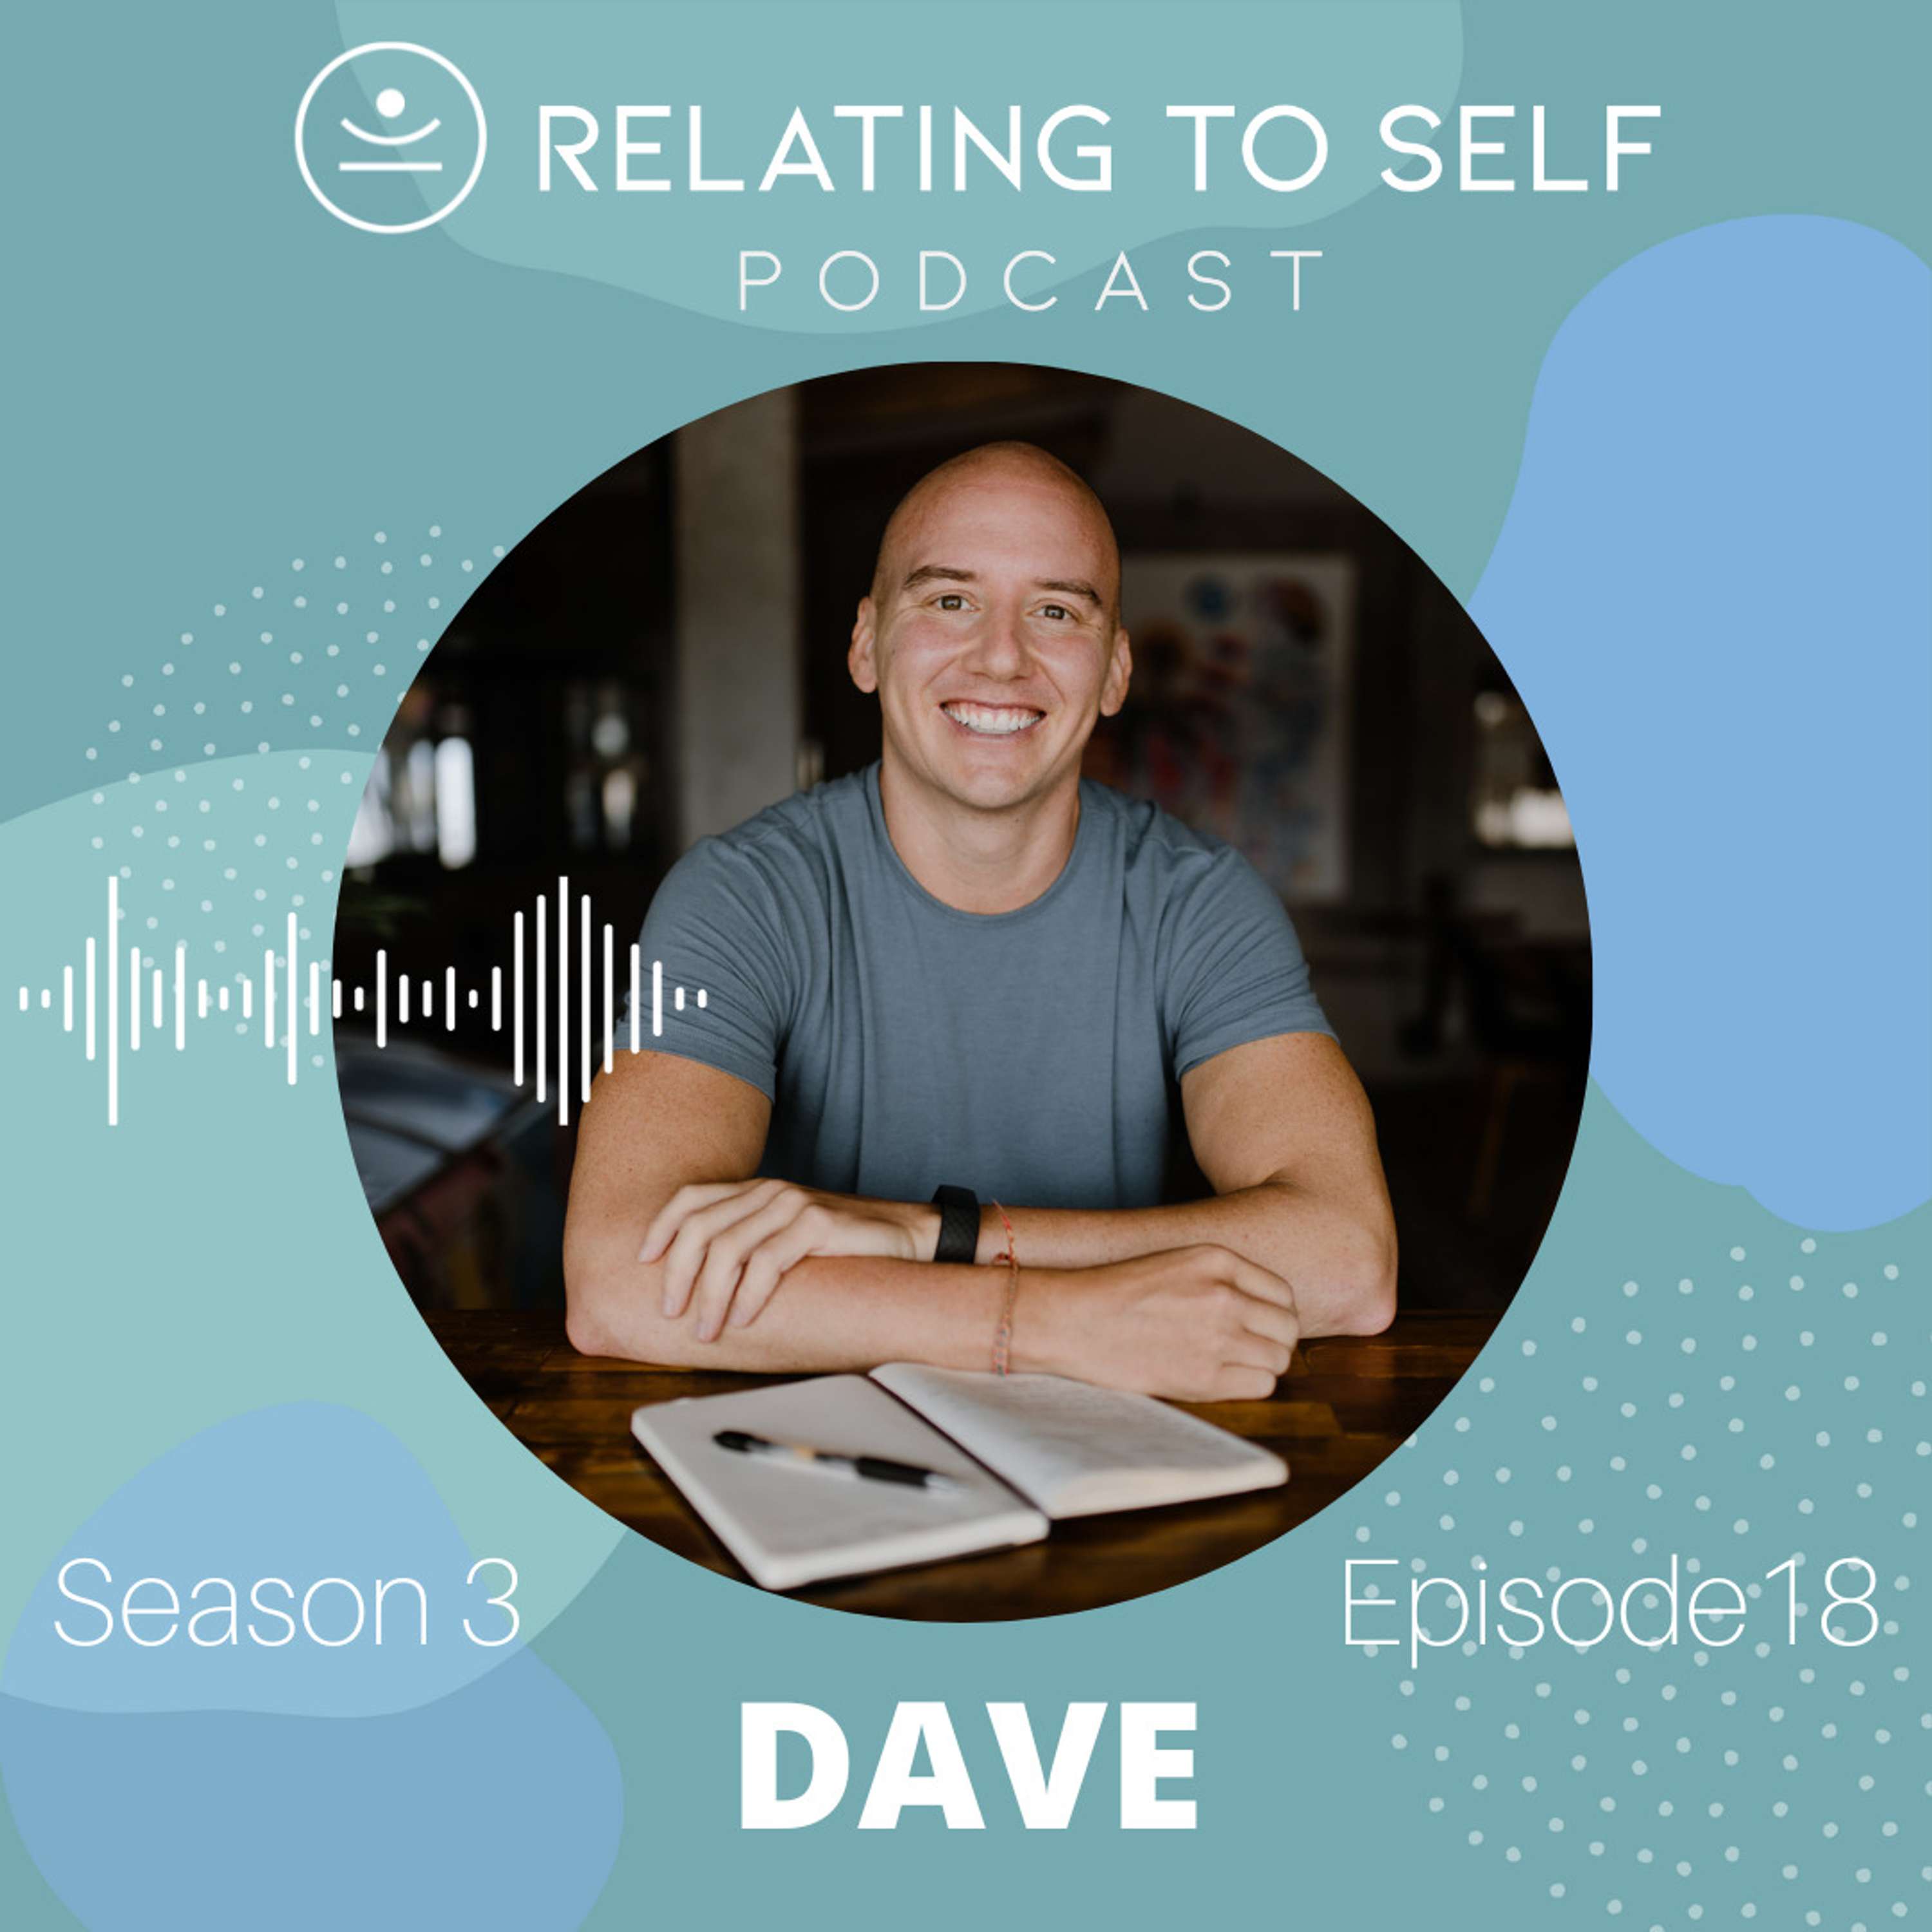 Journaling as a consistent self-reflection practice {with Dave}